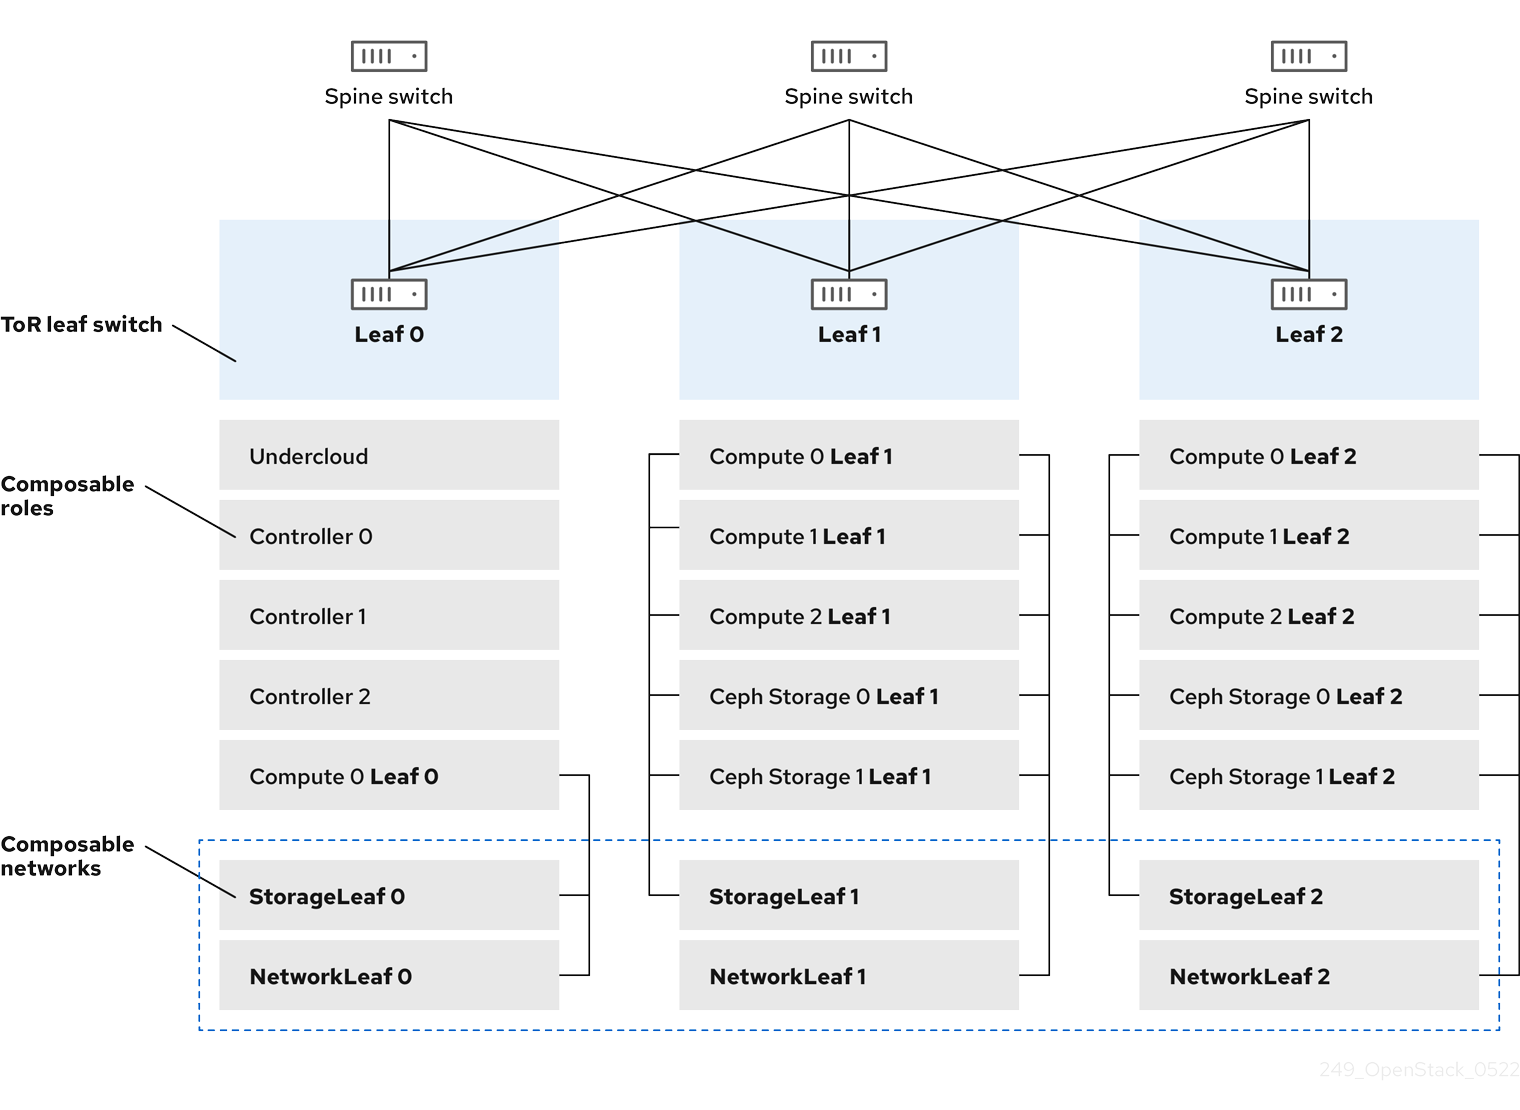 249 OpenStack Spine Leaf updates 0522 routed